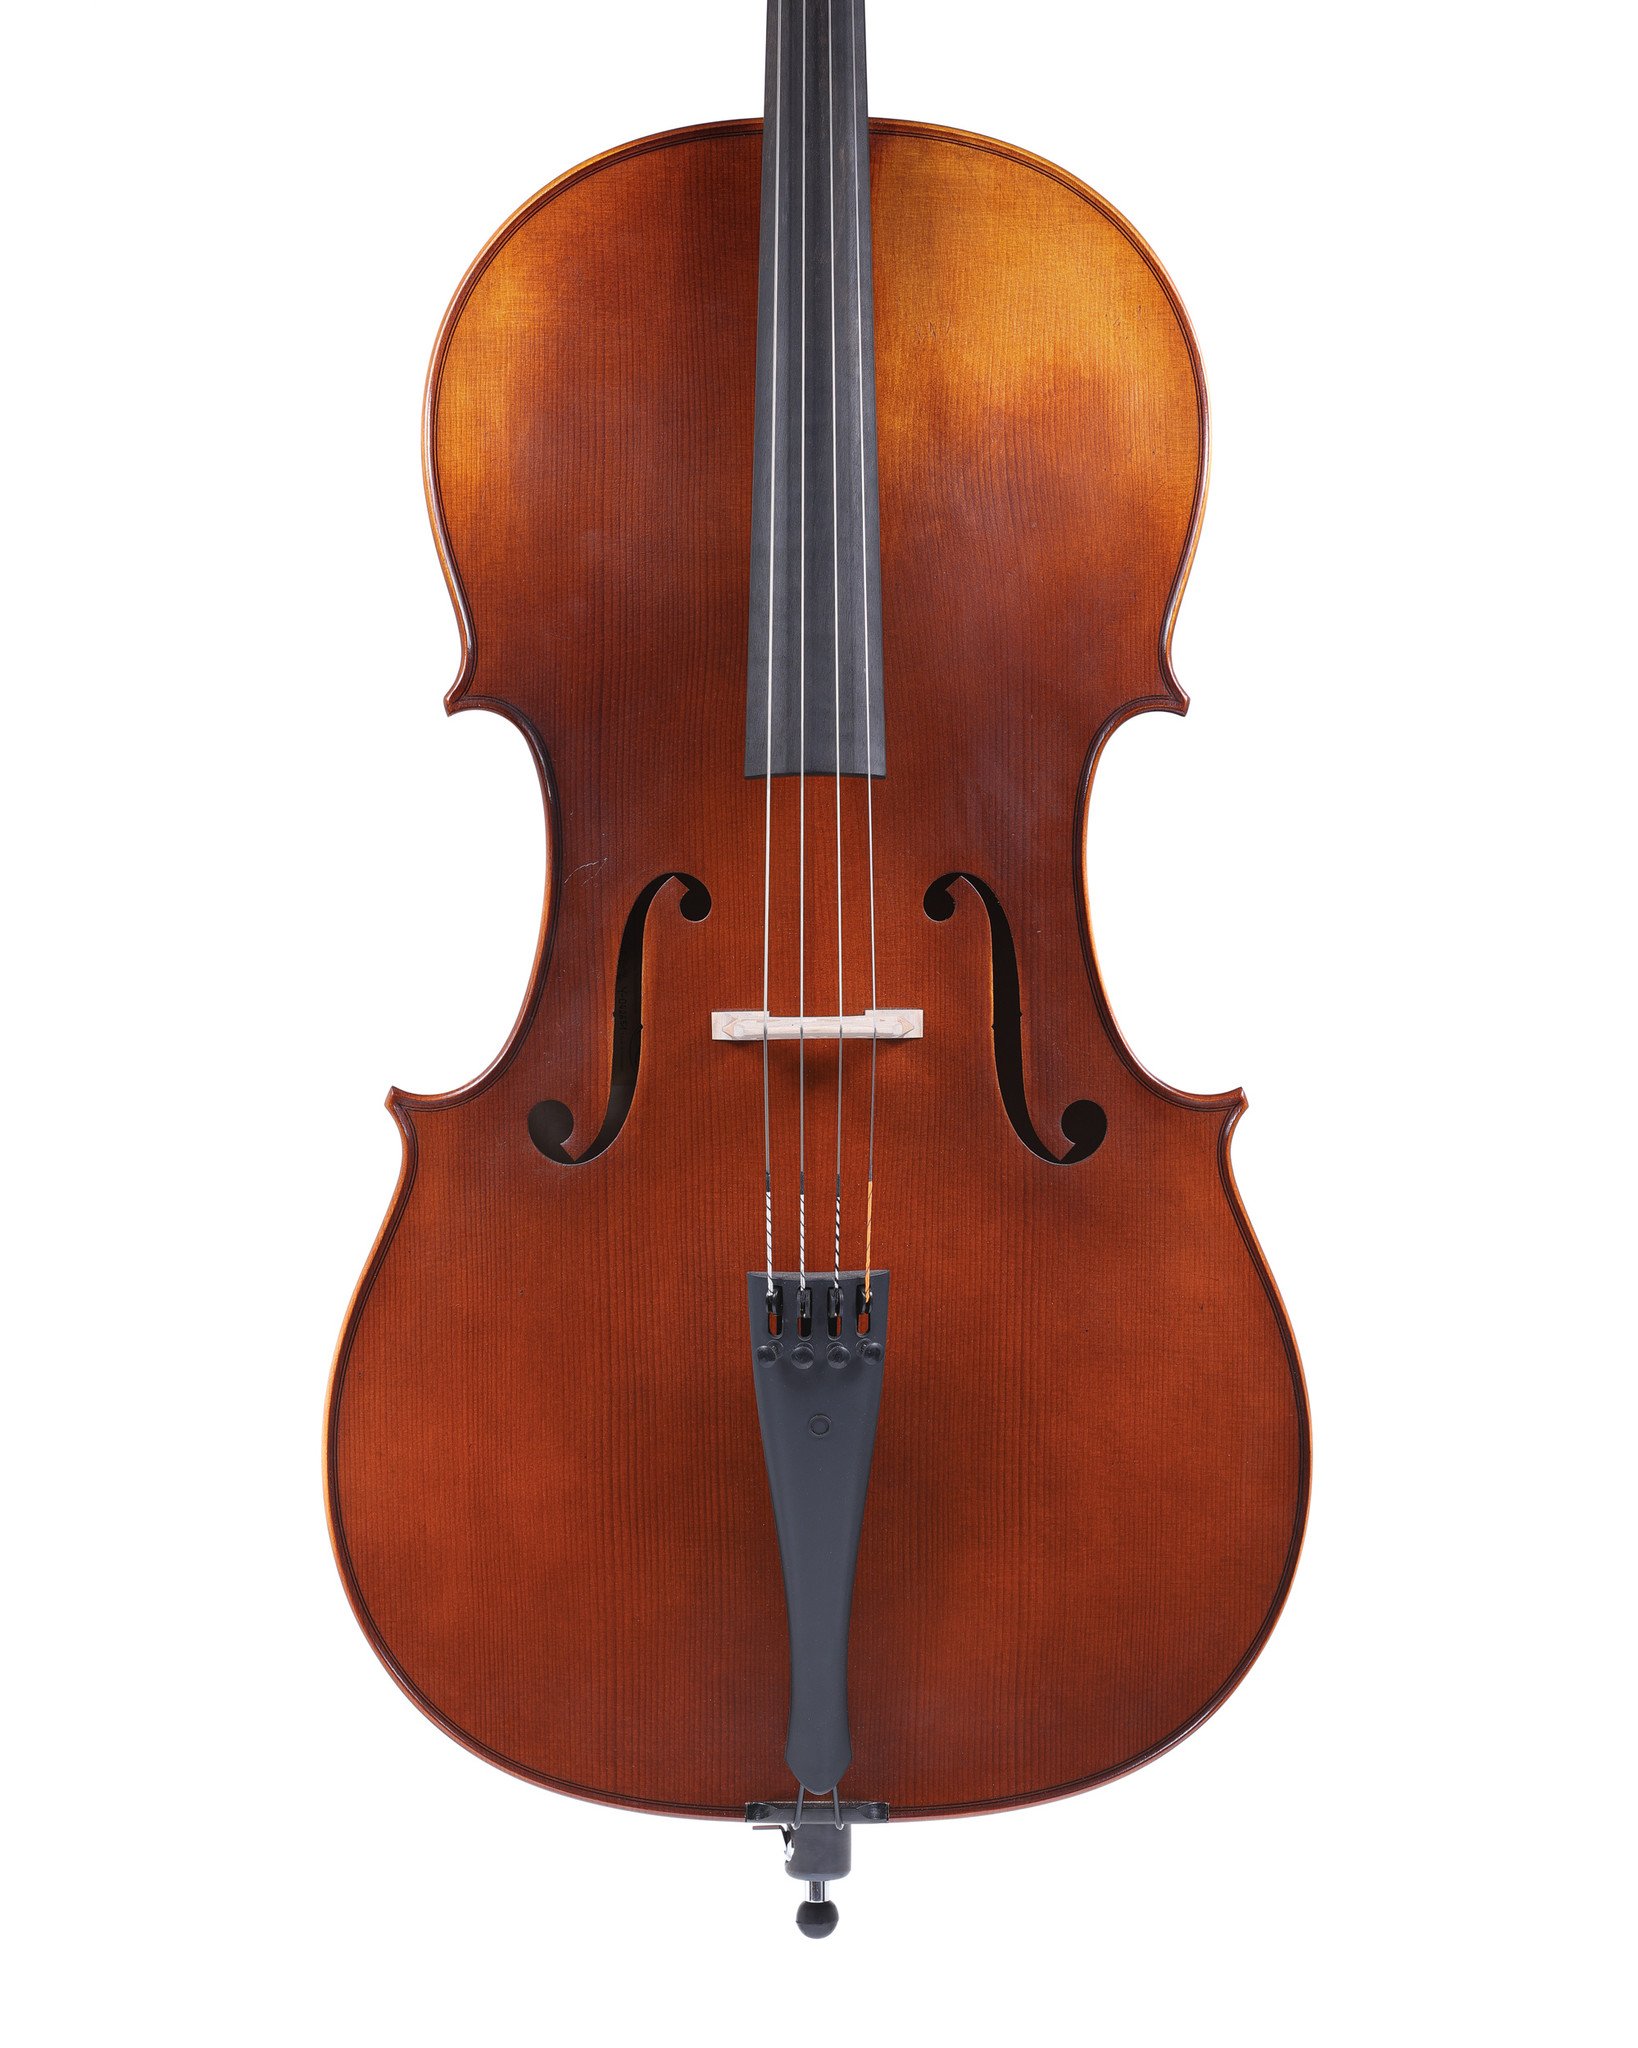 Shop - Metzler Roderich GERMANY Paesold cello, Violin 2022,